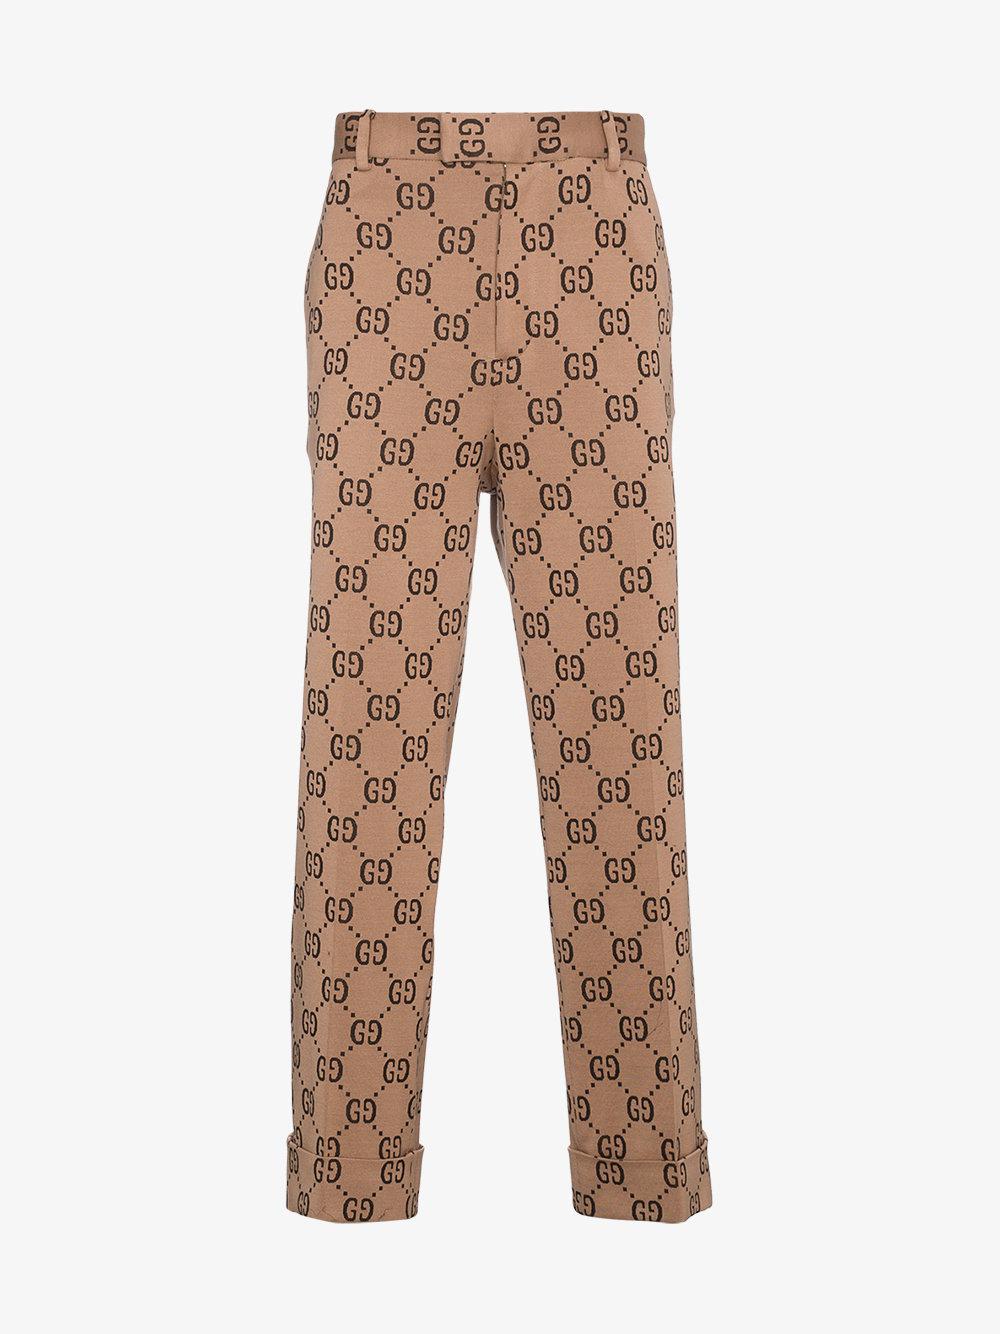 Gucci Double G Tailored Trousers in Brown for Men - Lyst